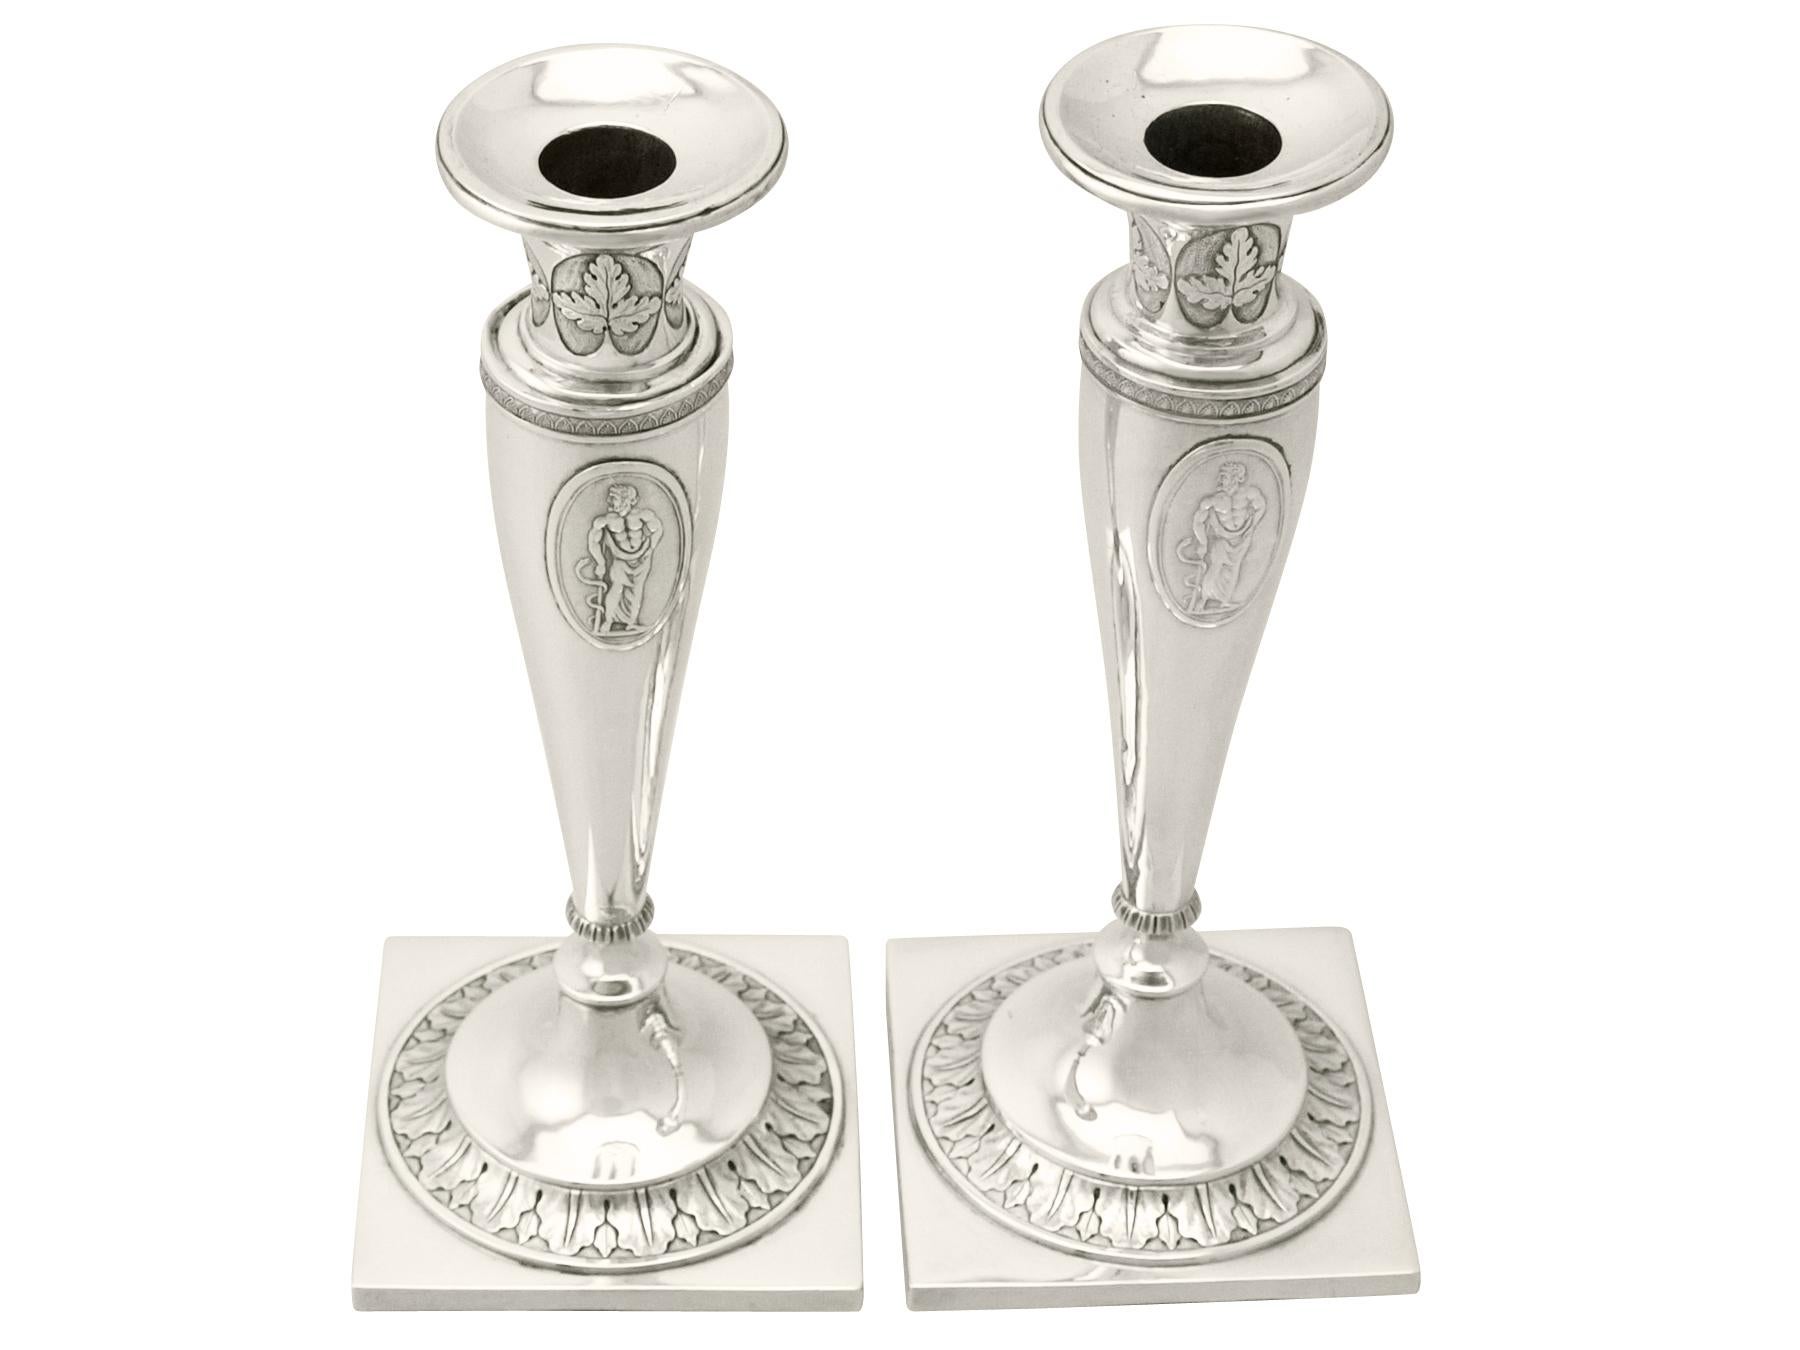 A very good pair of antique German silver candlesticks; an addition to our ornamental silverware collection.

These antique German silver candlesticks have a tapering, circular rounded form.

The candlesticks have waisted shaped capitals